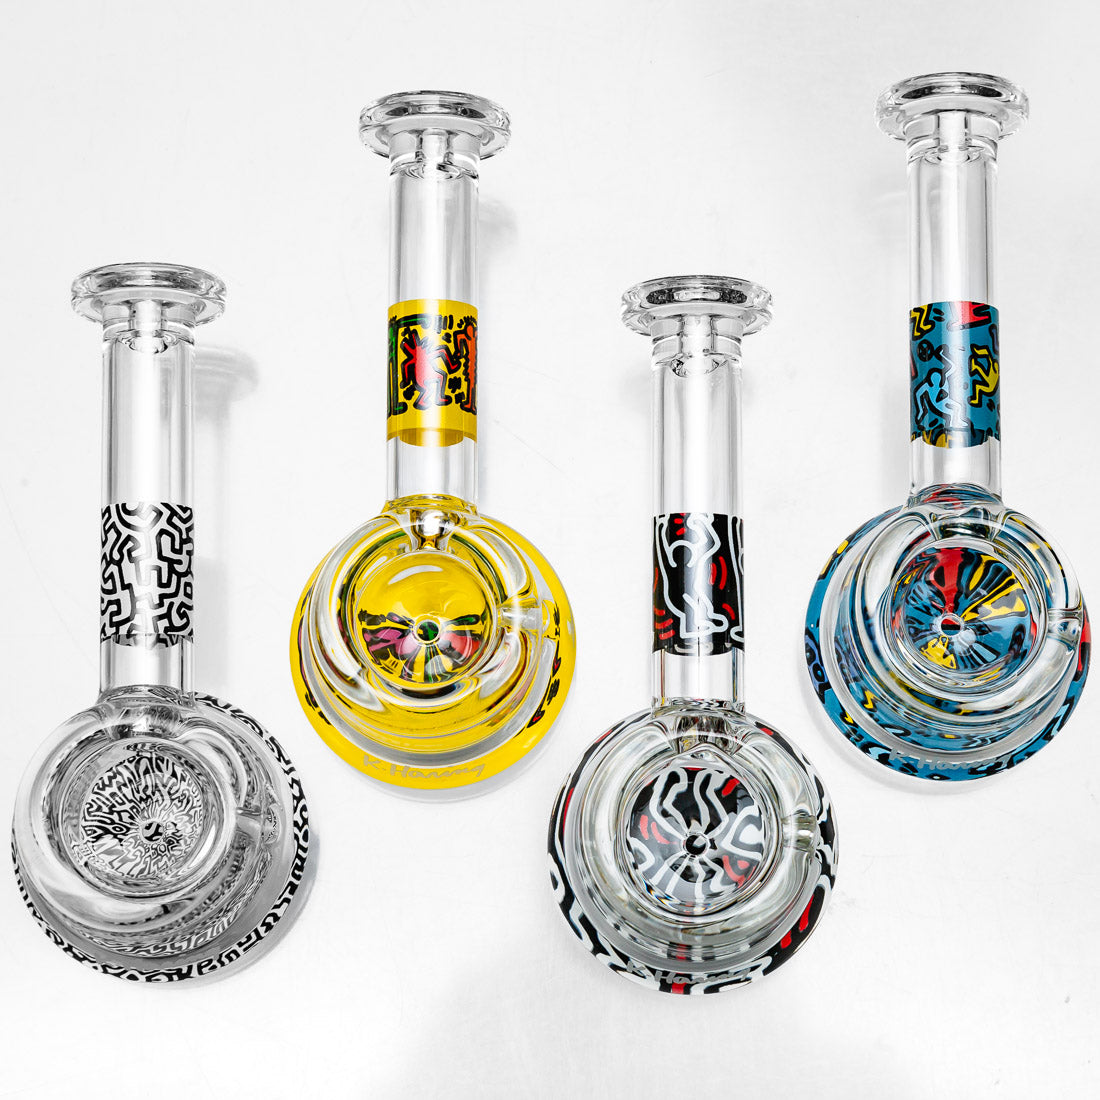 K. Haring Glass - Spoon Pipes